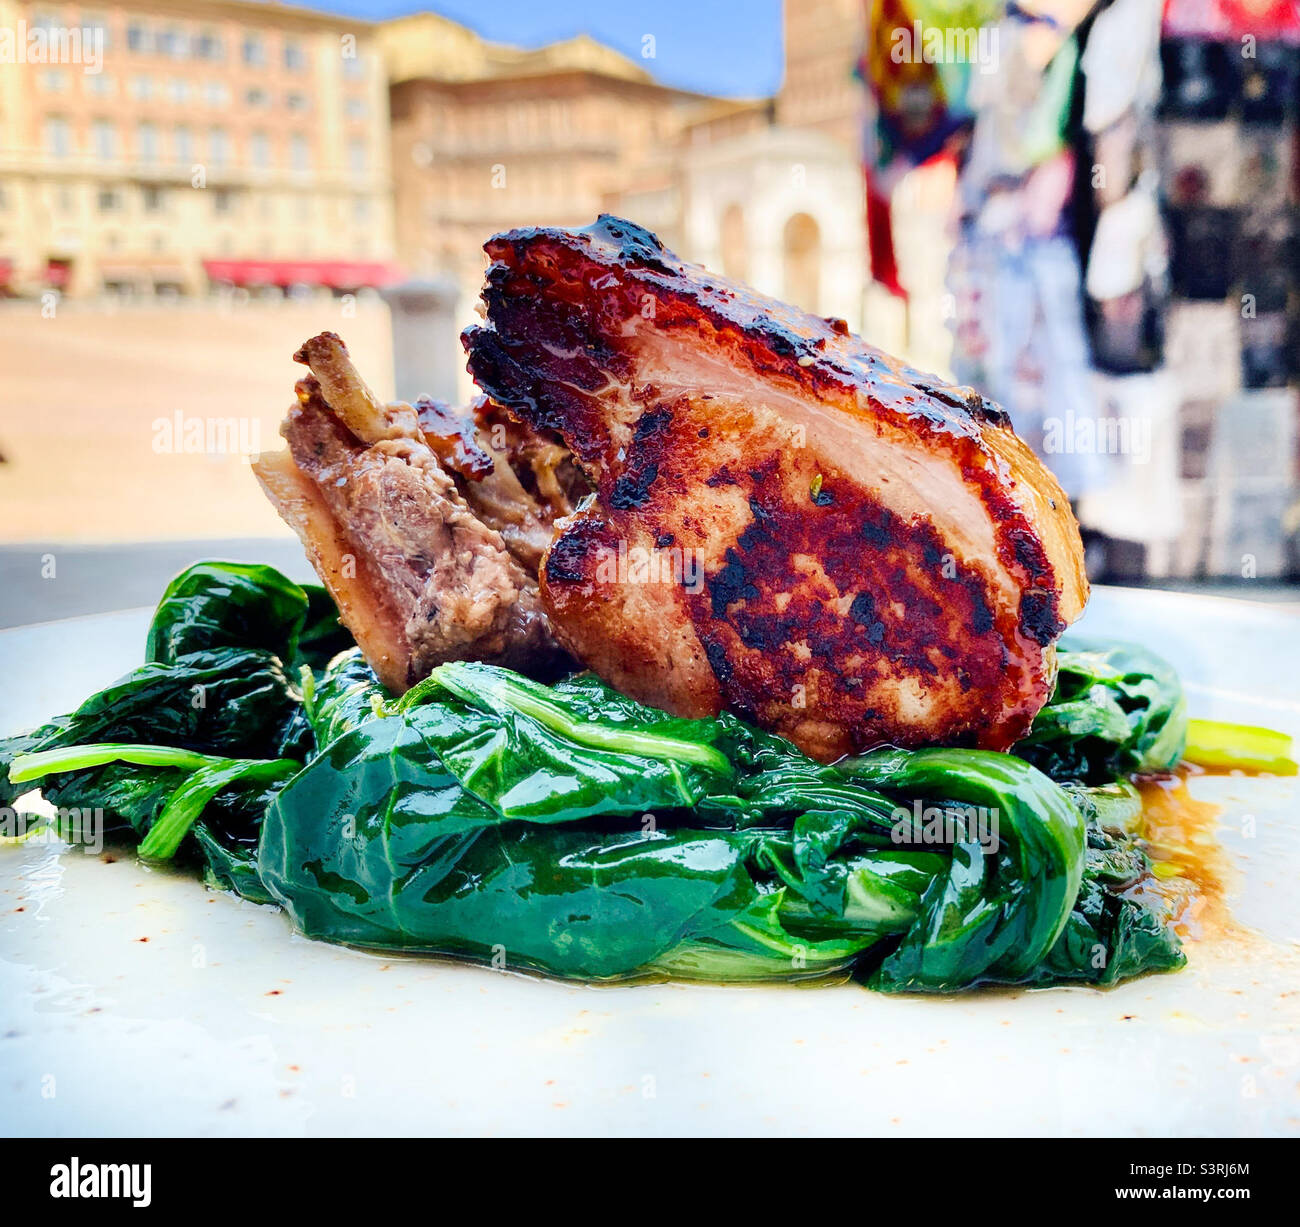 Roasted pork shank on a bed of lettuce with outdoor dining in Siena, Italy Stock Photo